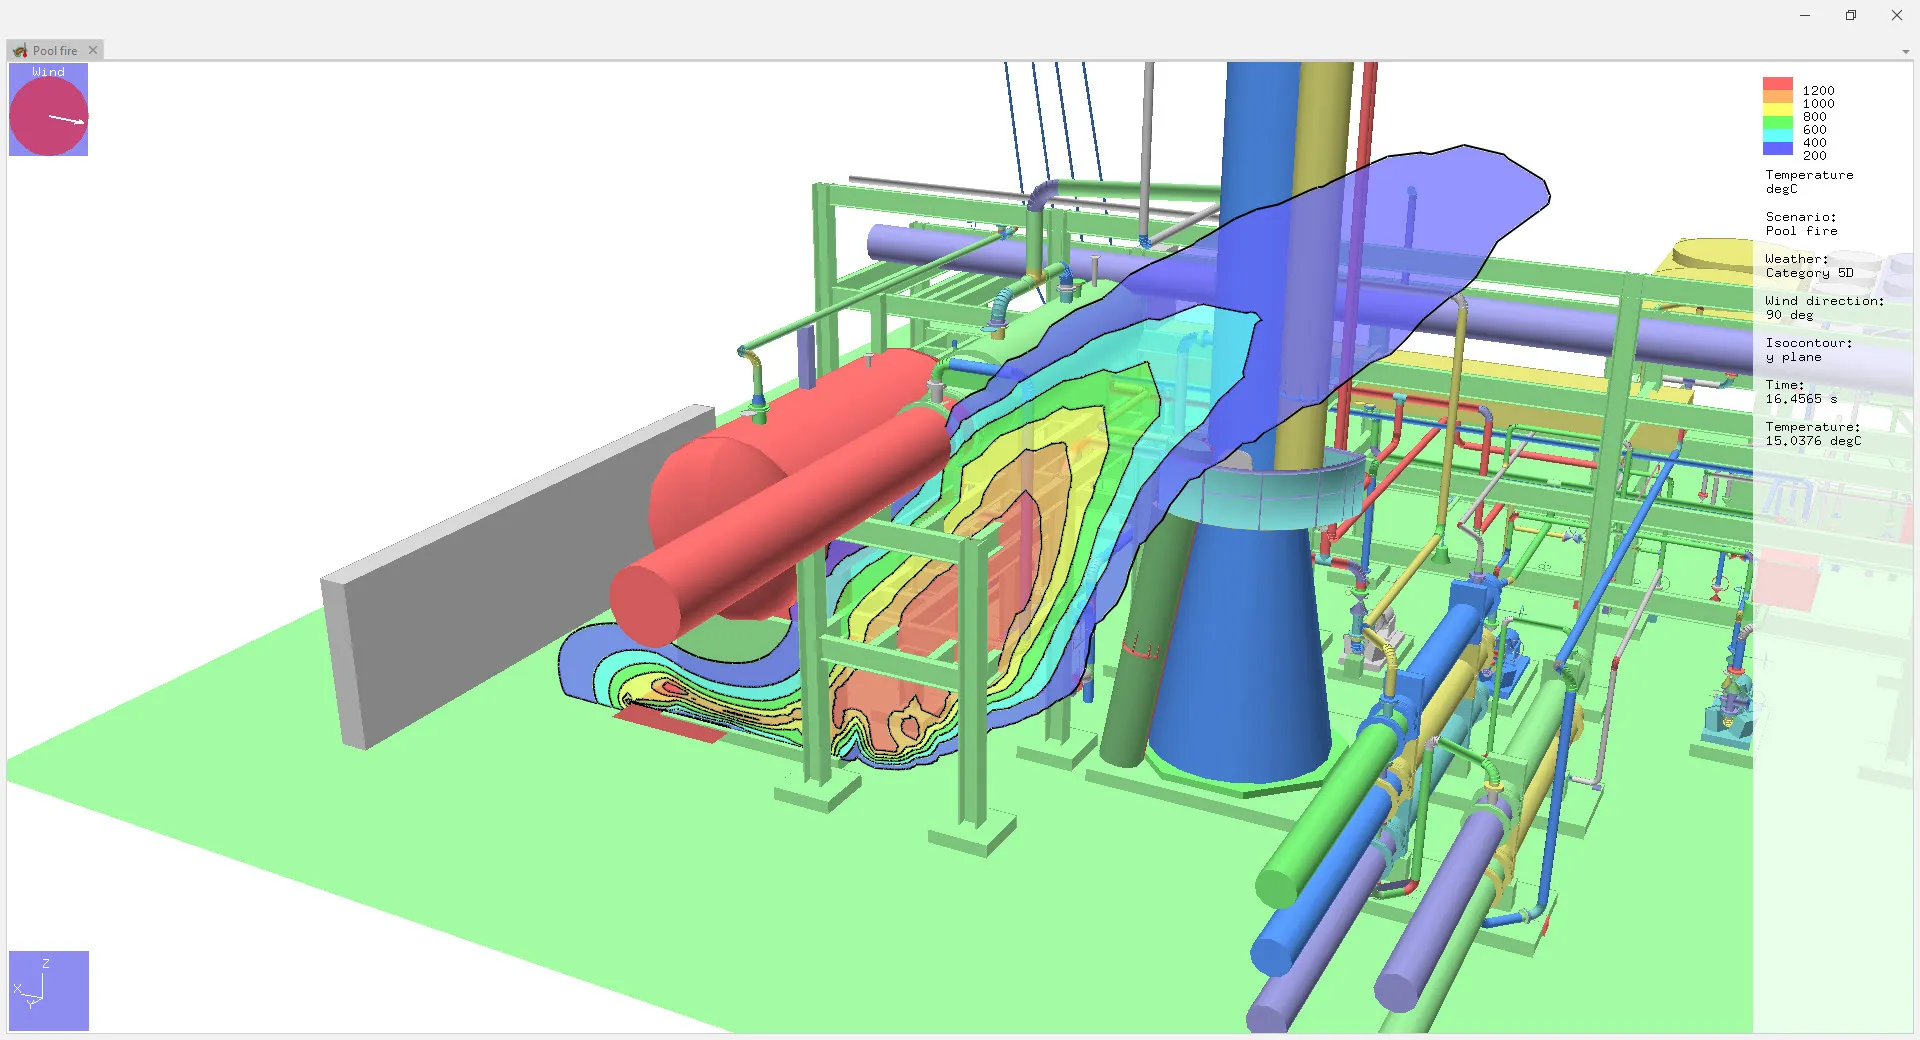 Screenshot from Phast software, showing pool fire temperature contours modelled in 3D using the CFD extension